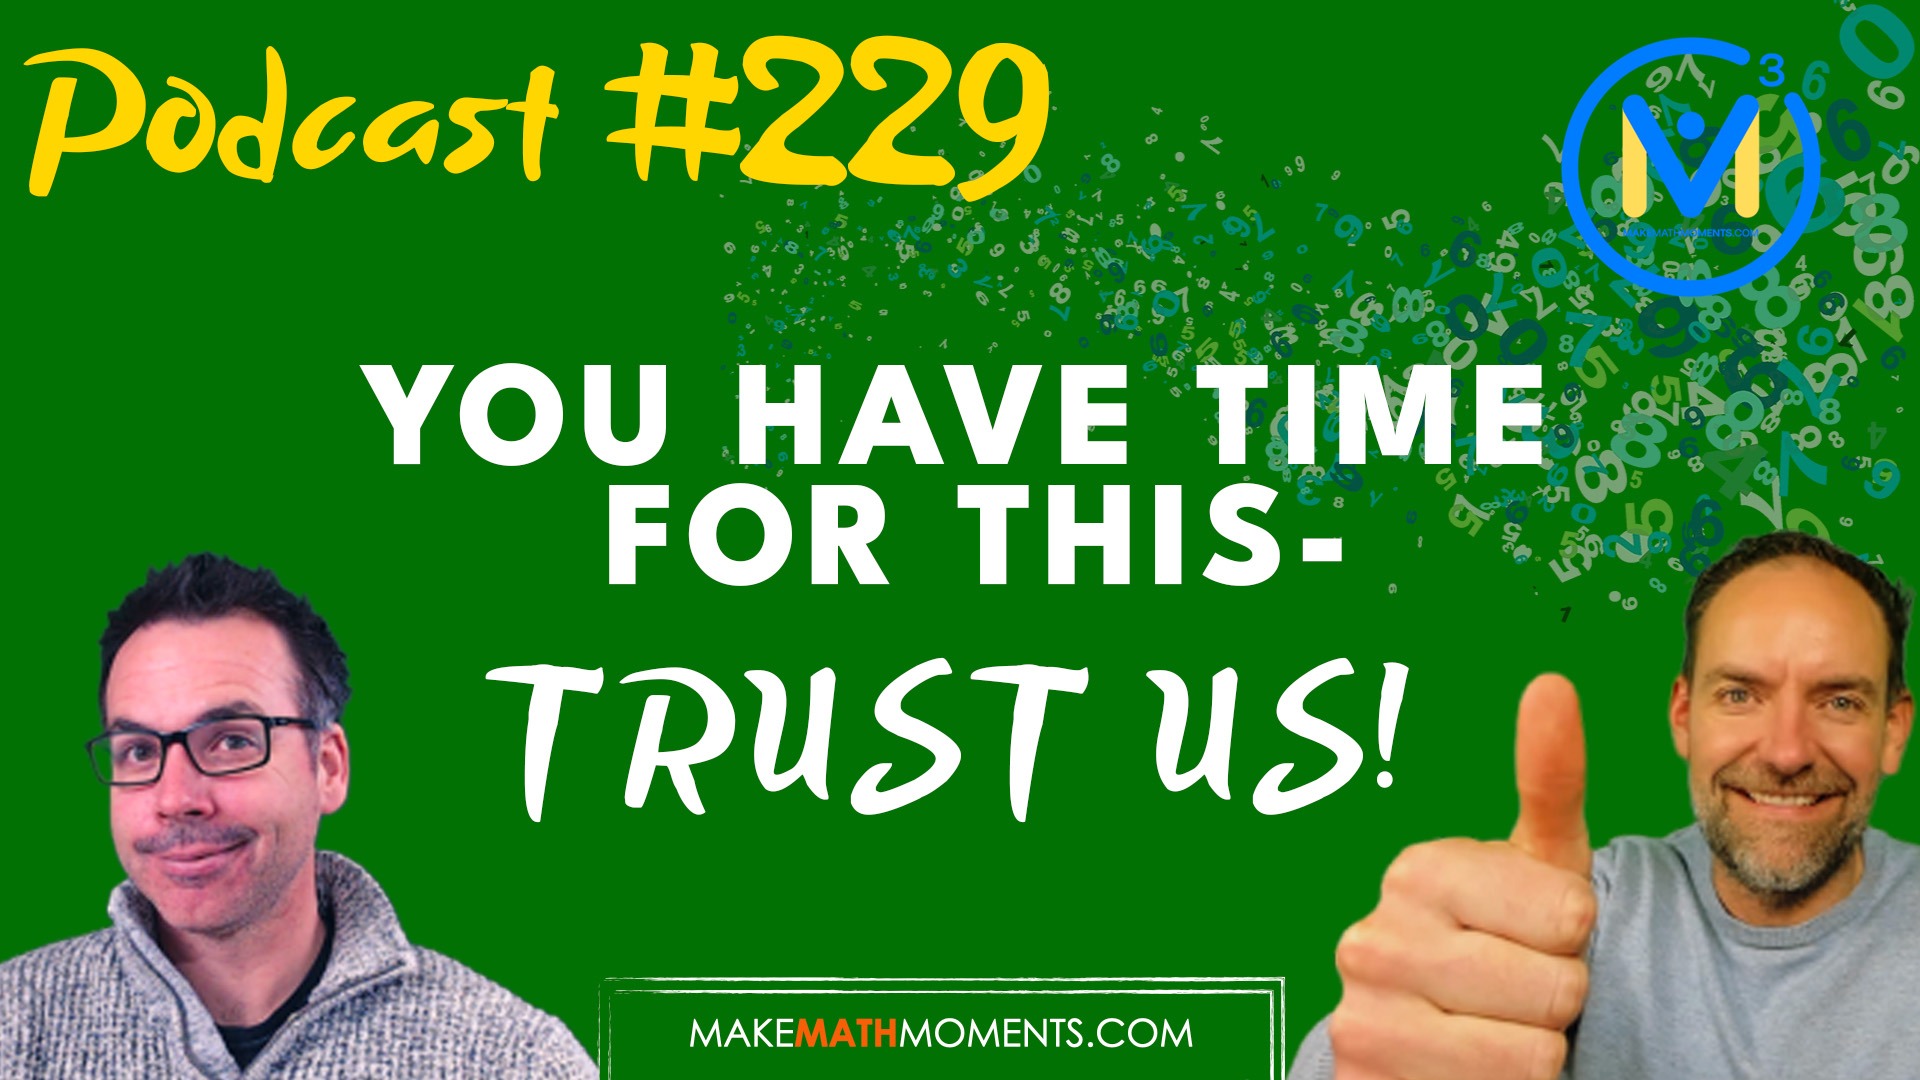 Episode 229: You Have Time For This – Trust Us!